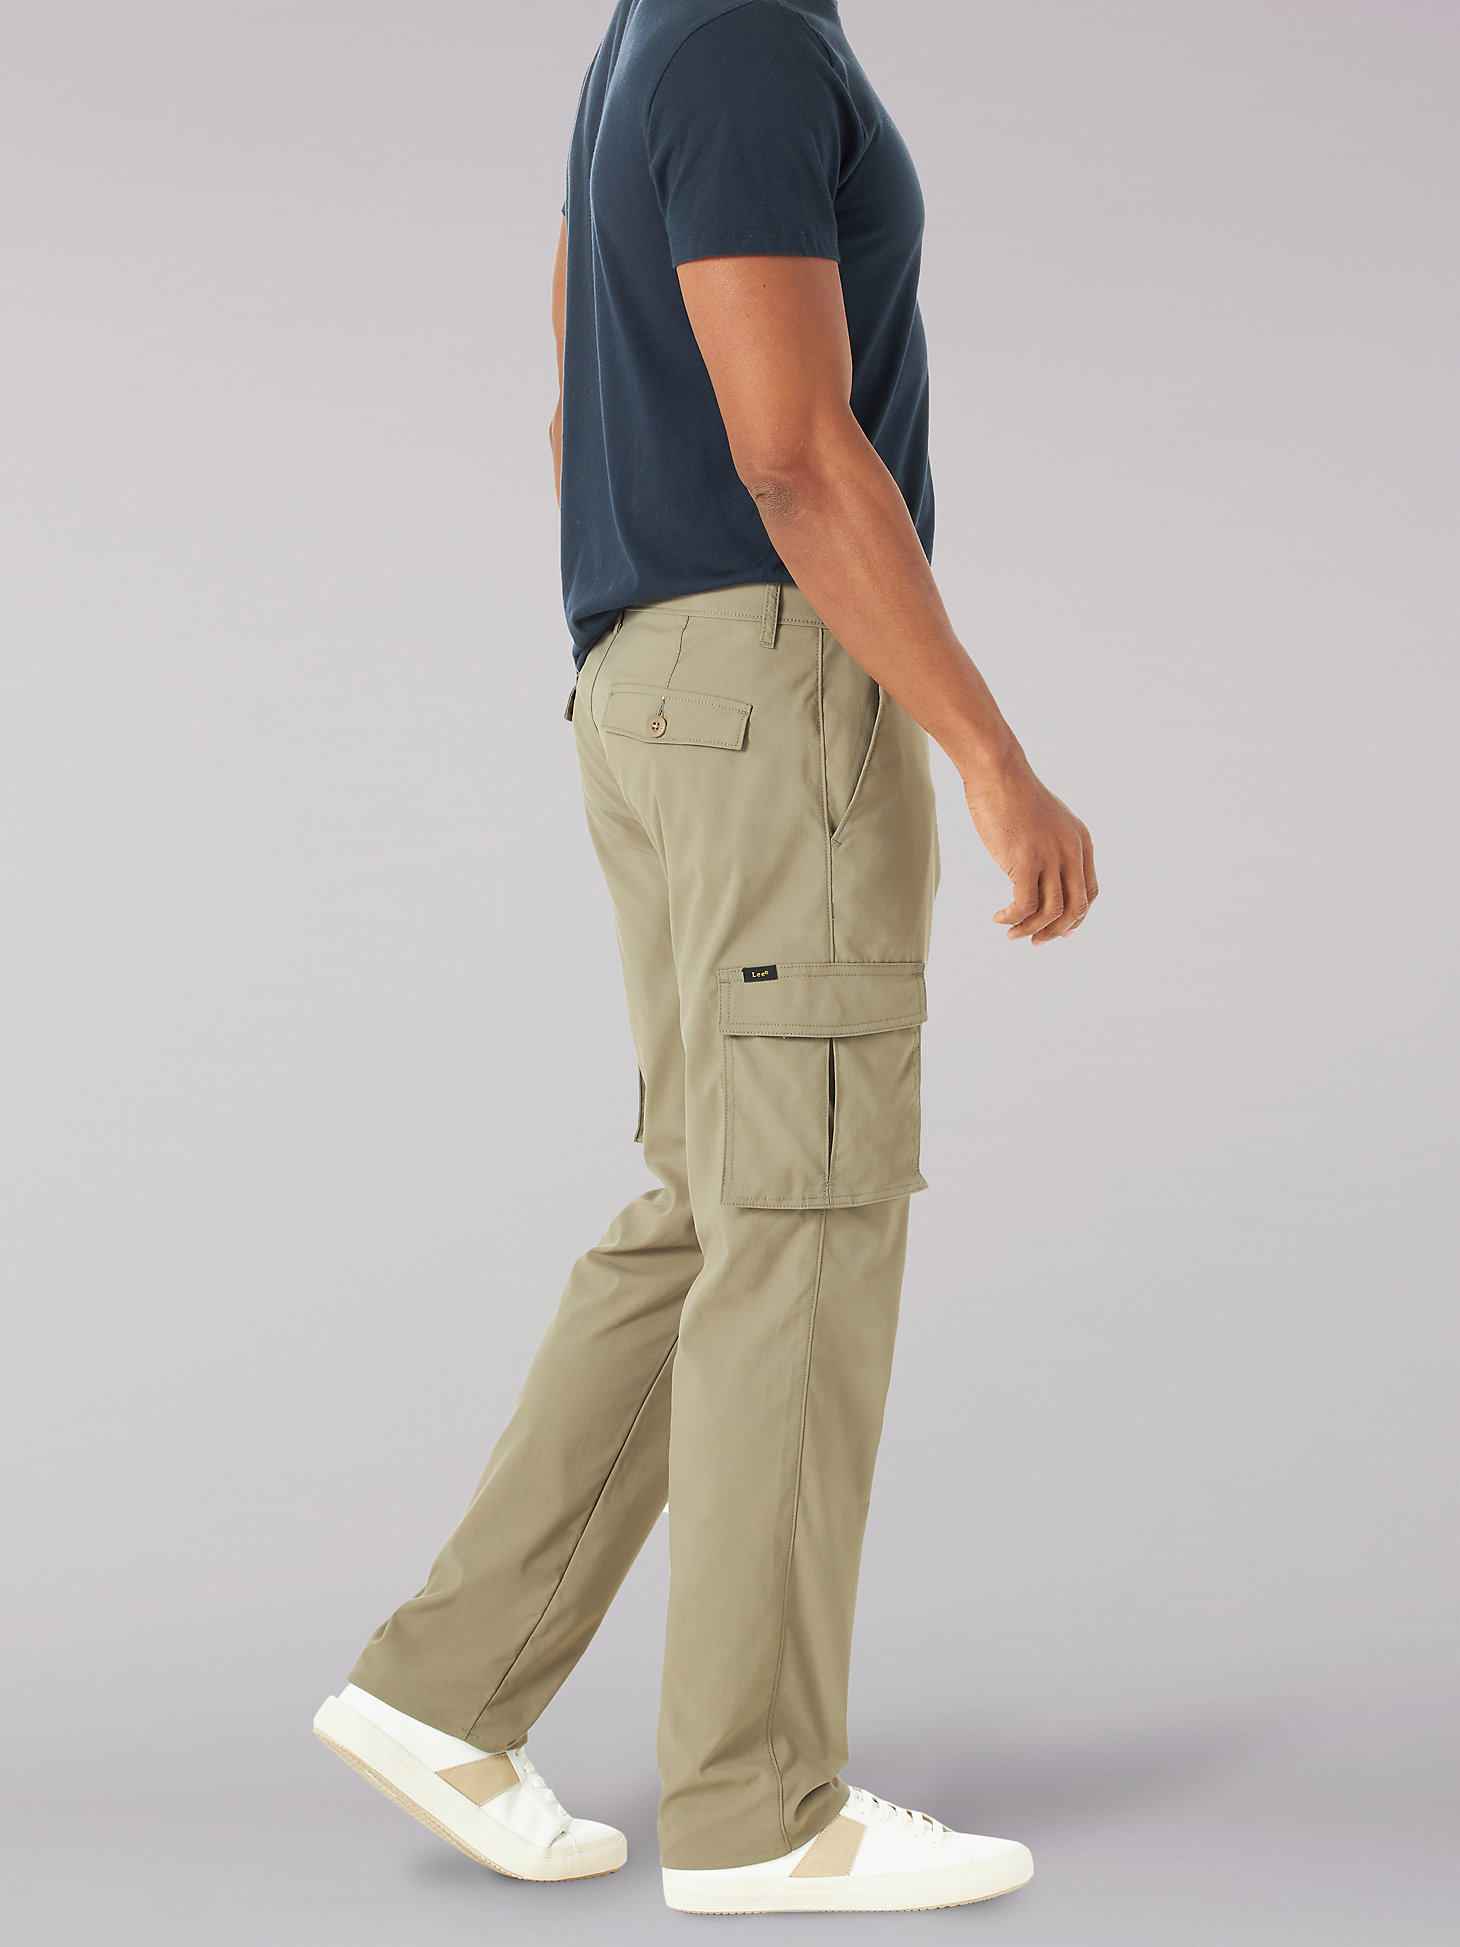 Y-3 Synthetic Classic Cargo Pants in Natural Slacks and Chinos Cargo trousers Womens Clothing Trousers 